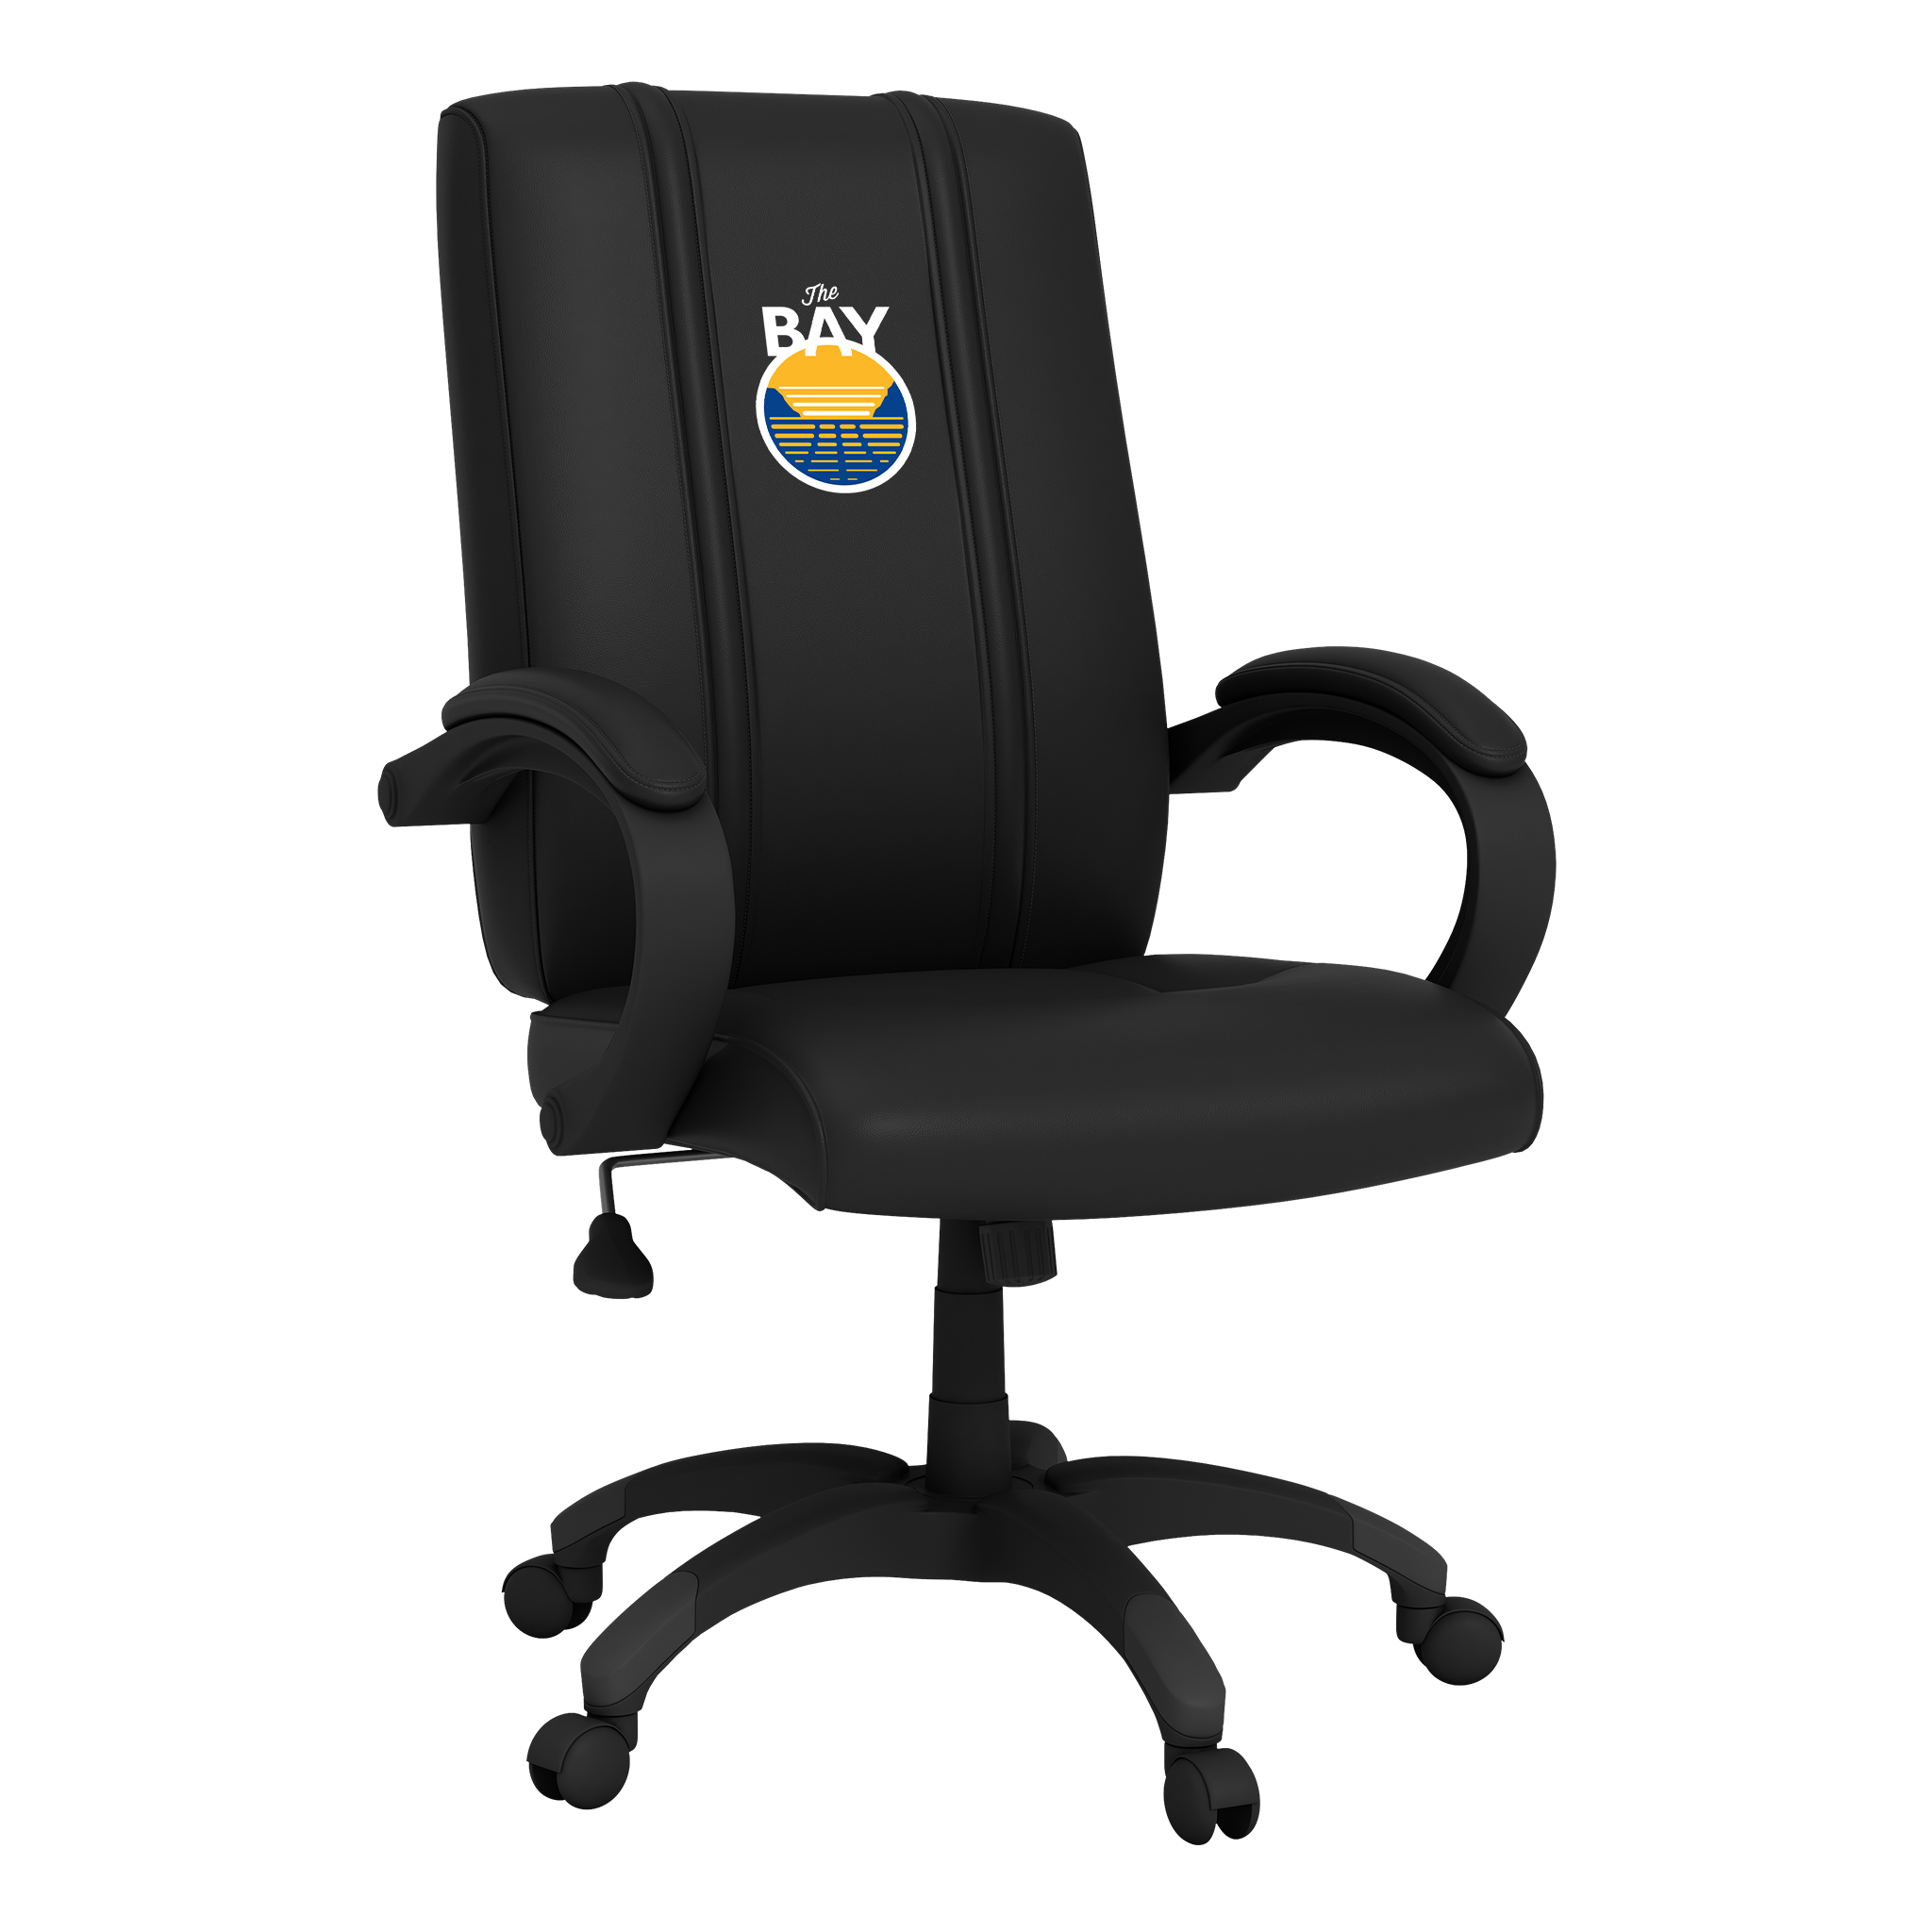 Golden State Warriors Office Chair 1000 with Golden State Warriors Secondary Logo